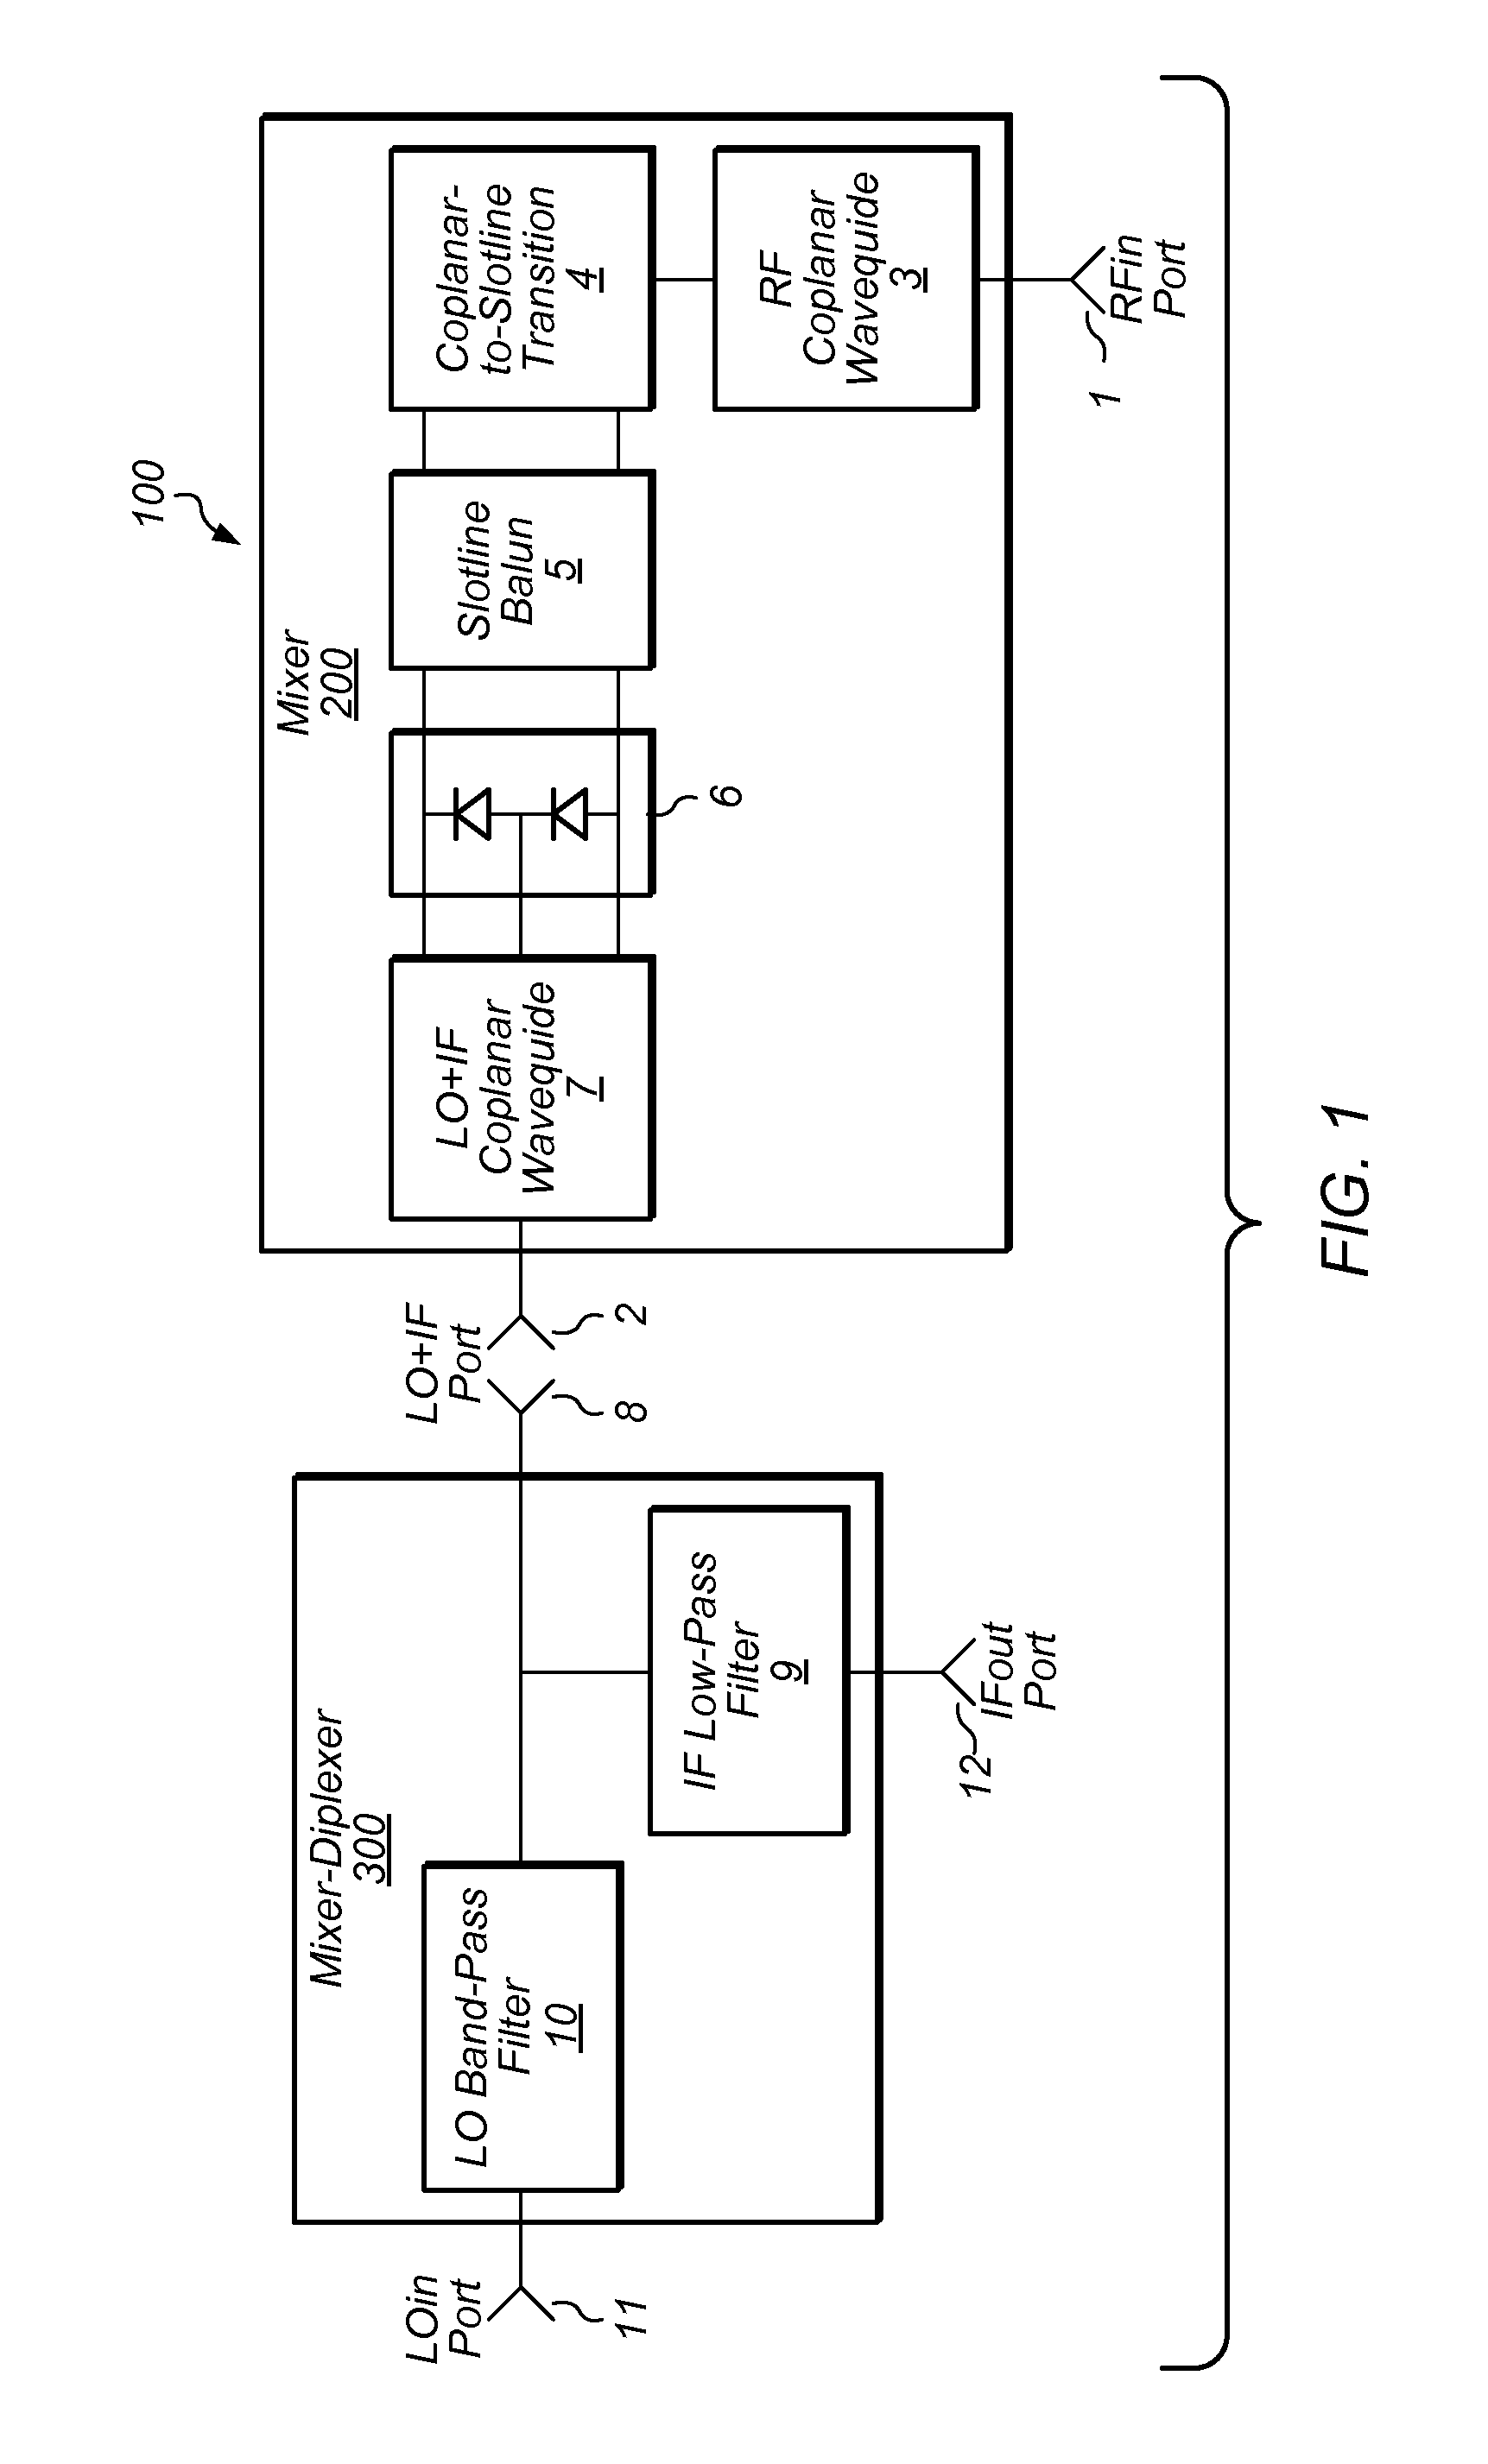 Ultra-broadband planar millimeter-wave mixer with multi-octave IF bandwidth